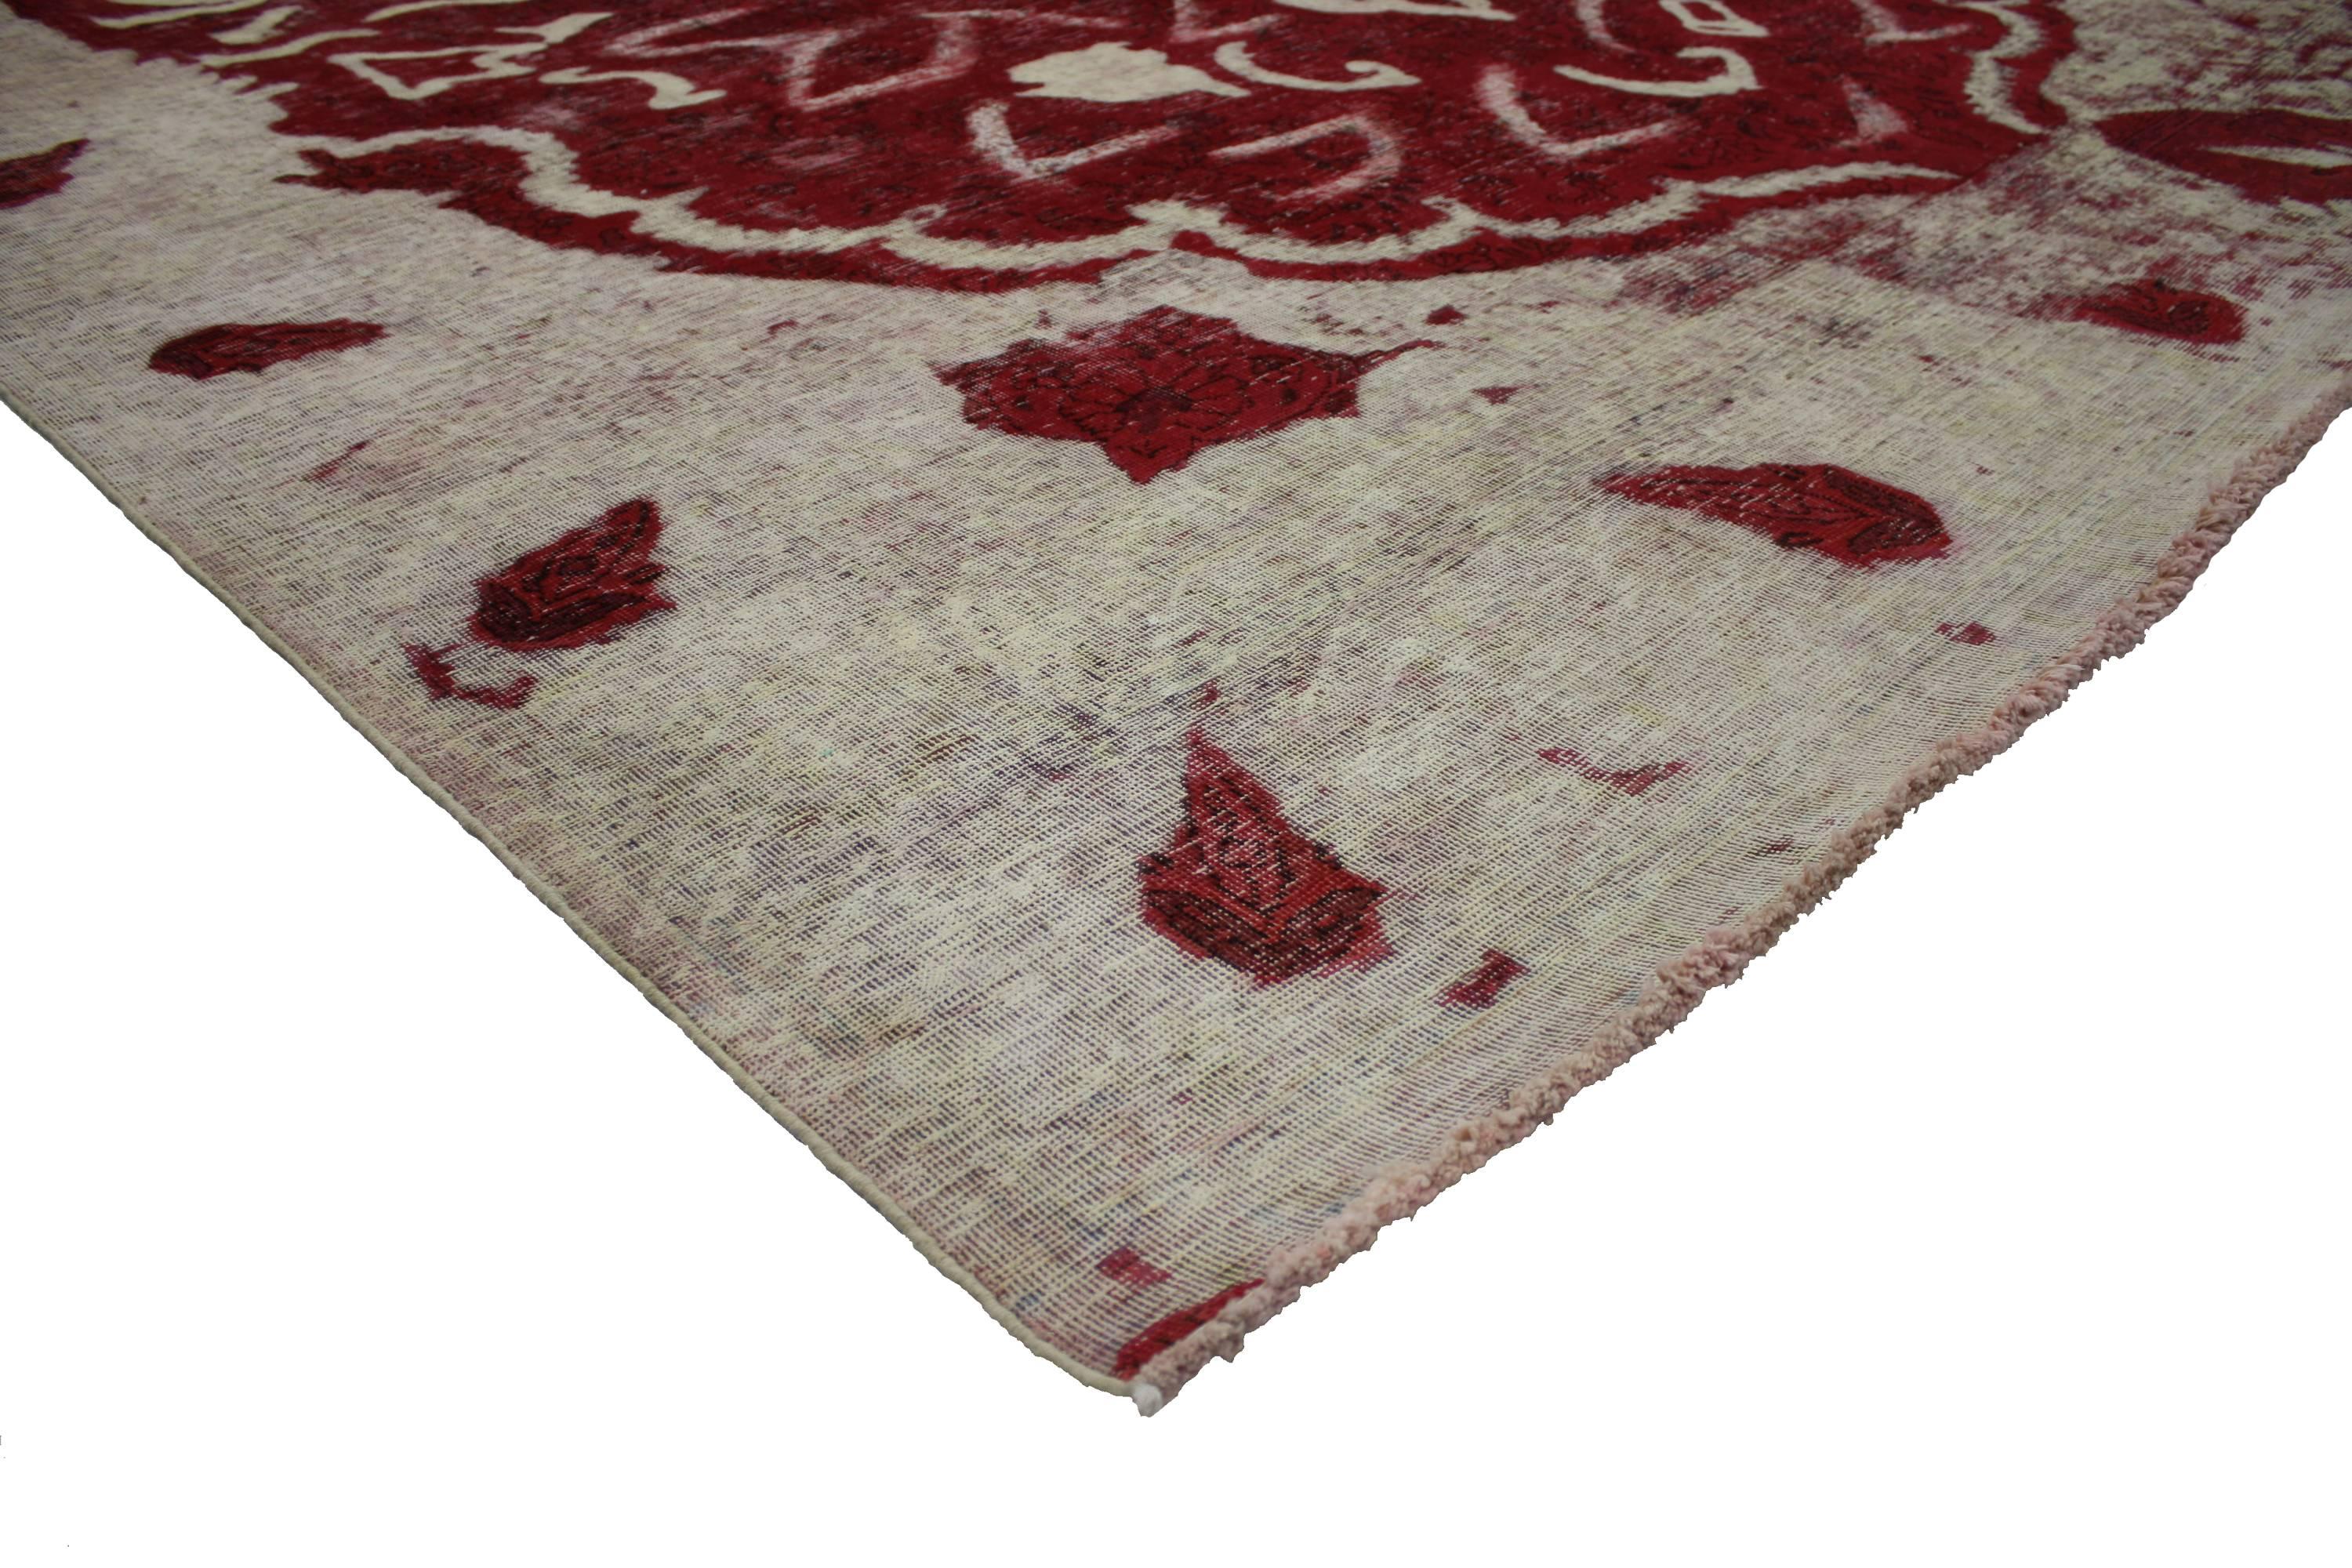 80235 Vintage Persian Red Overdyed Rug, 09'03 x 12'09. 
​Introducing the magnificent vintage Persian overdyed rug, a true masterpiece that exudes an unparalleled gracefulness in its design. Prepare to be captivated by the sheer beauty that unfolds